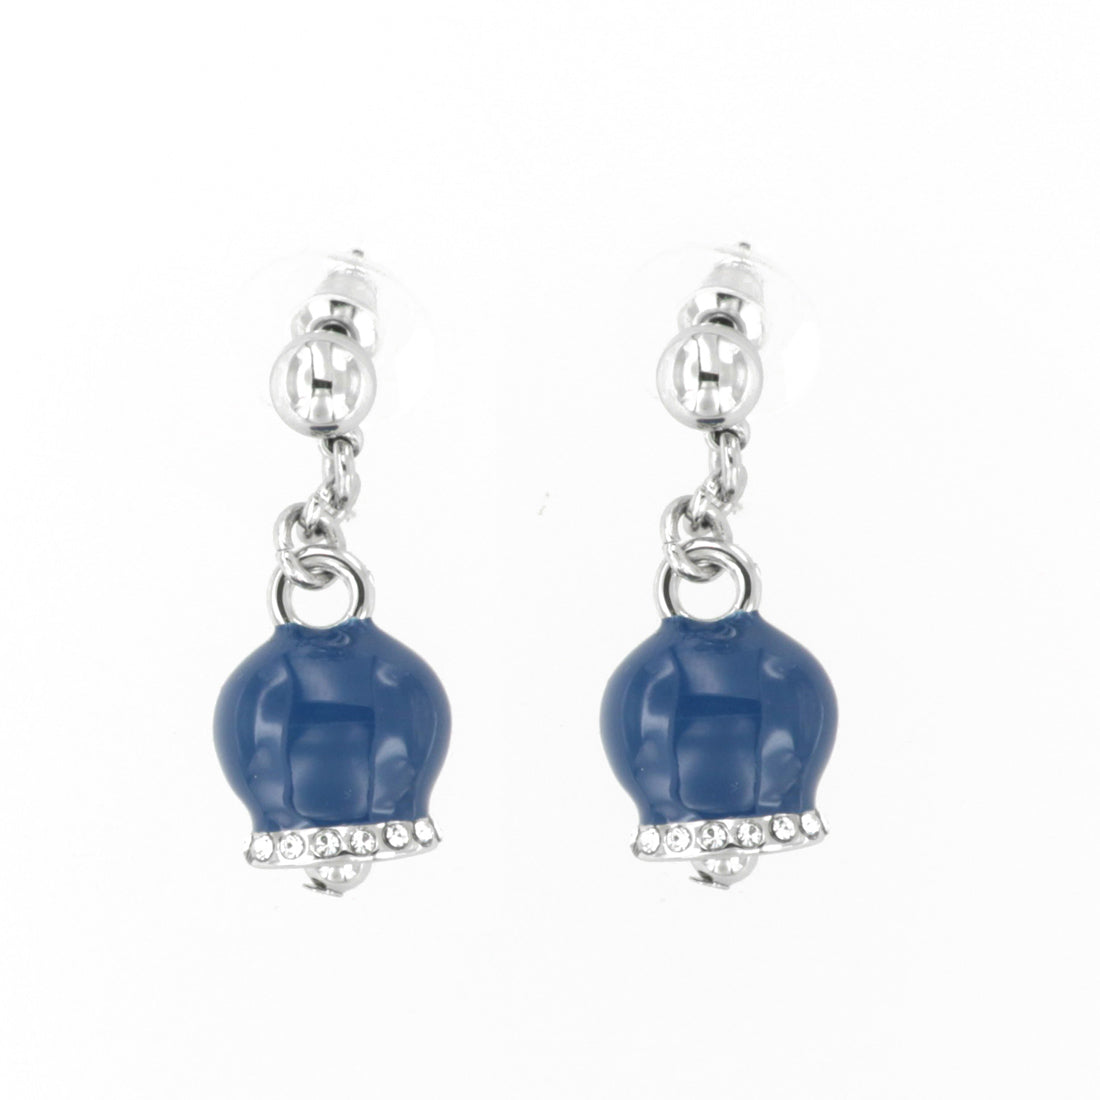 Metal earrings with pendant lucky charming bell, embellished with blue enamel and crystals